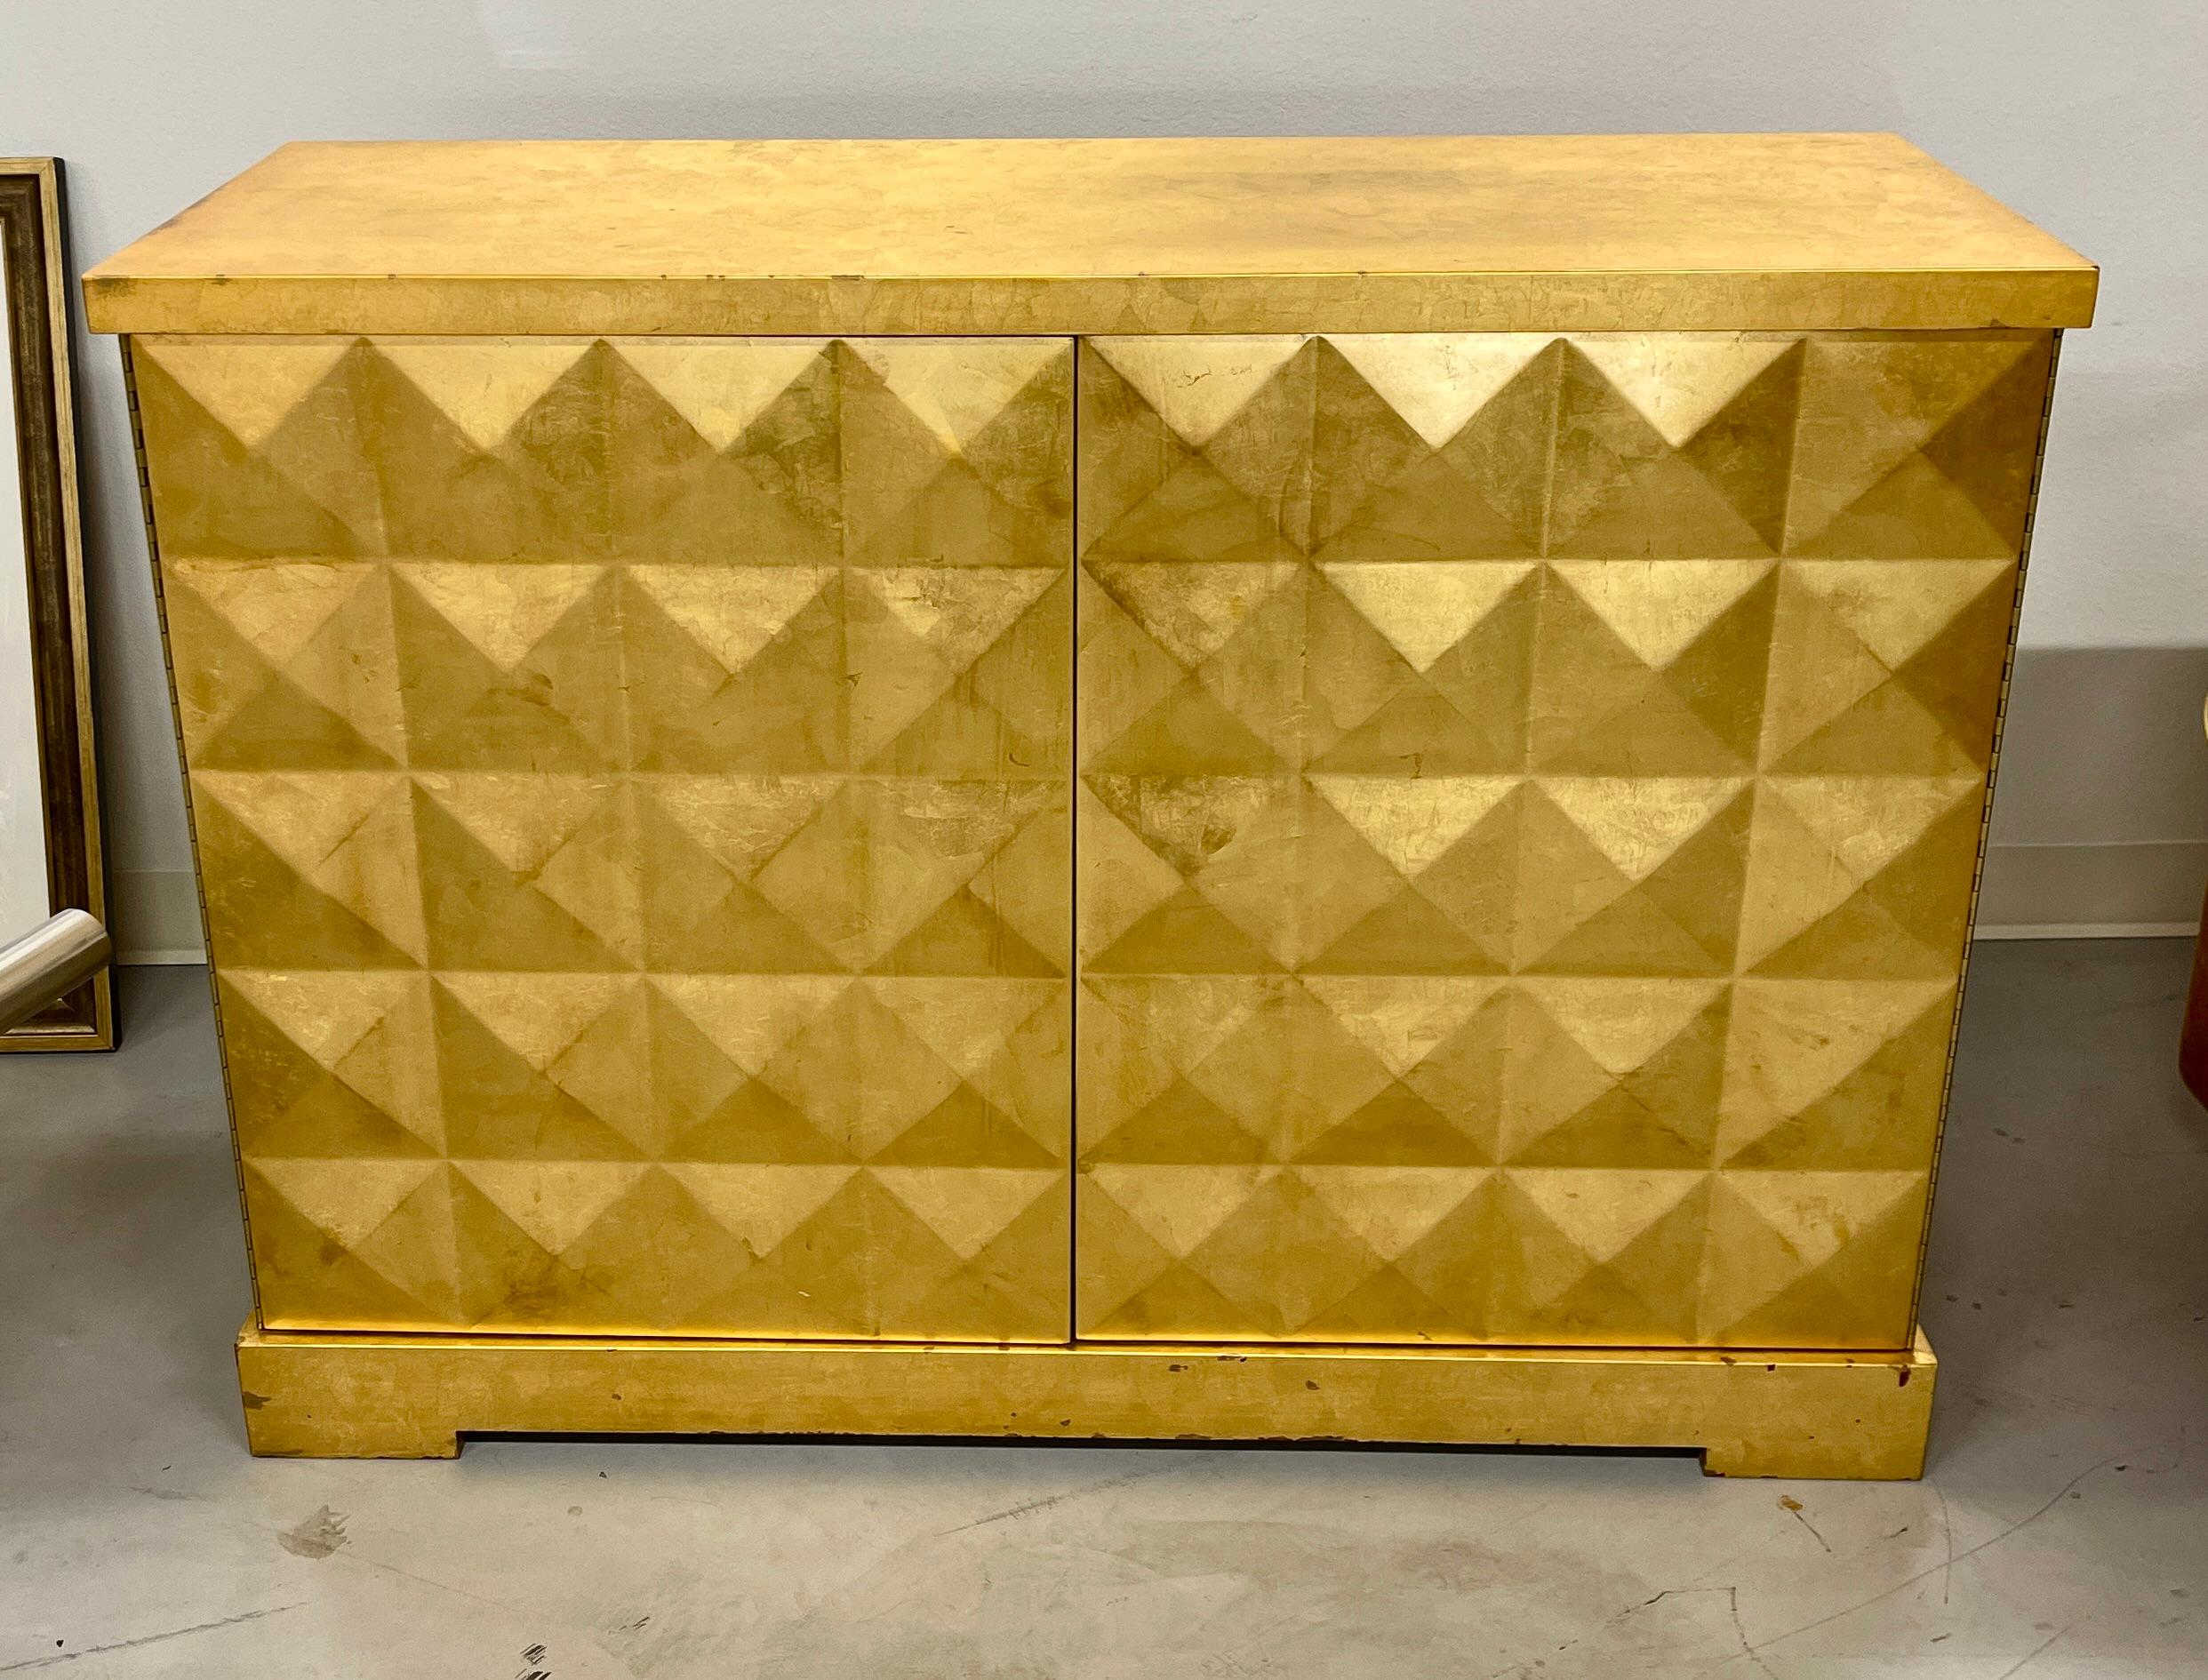 Beautiful Barbara Barry for Baker Furniture gold leaf chest with a diamond pattern in front. The piece bears the tag on the rear. It is style number 3428. Pretty piece with some loss to the gold leaf and some nicks and imperfections. The front door